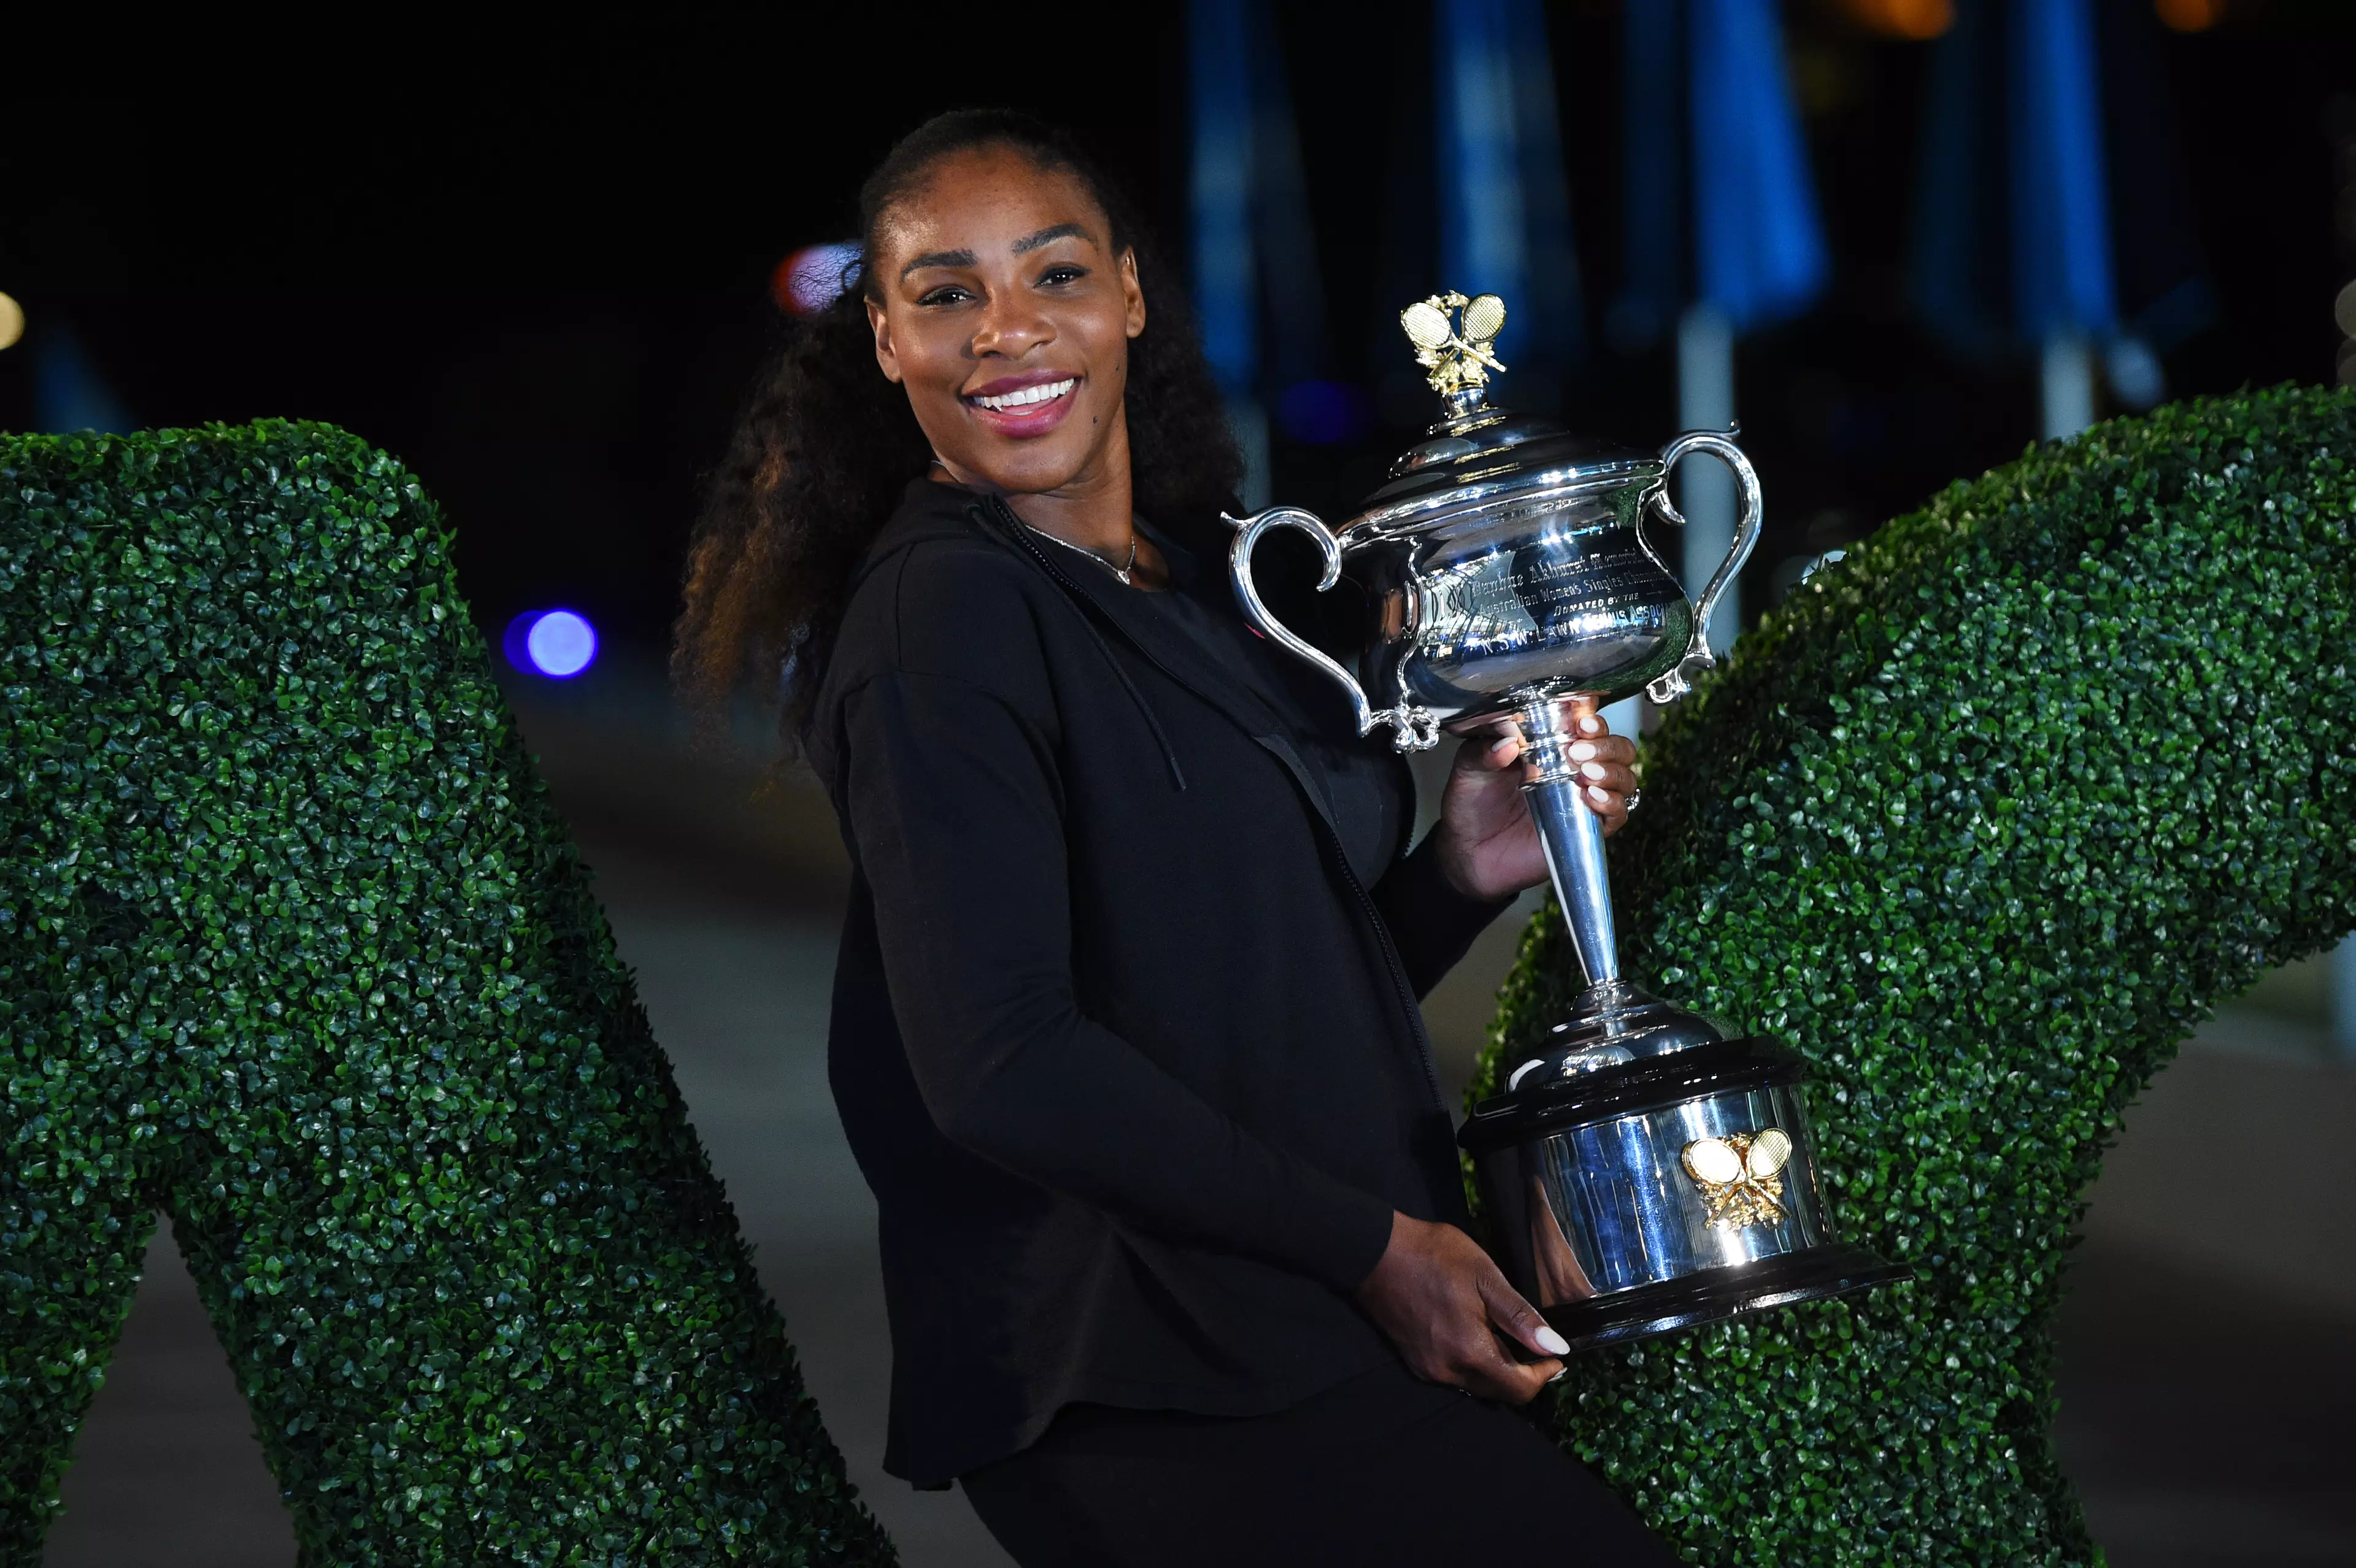 Serena was eight weeks pregnant when she won the 2017 Australian Open. Image: PA Images